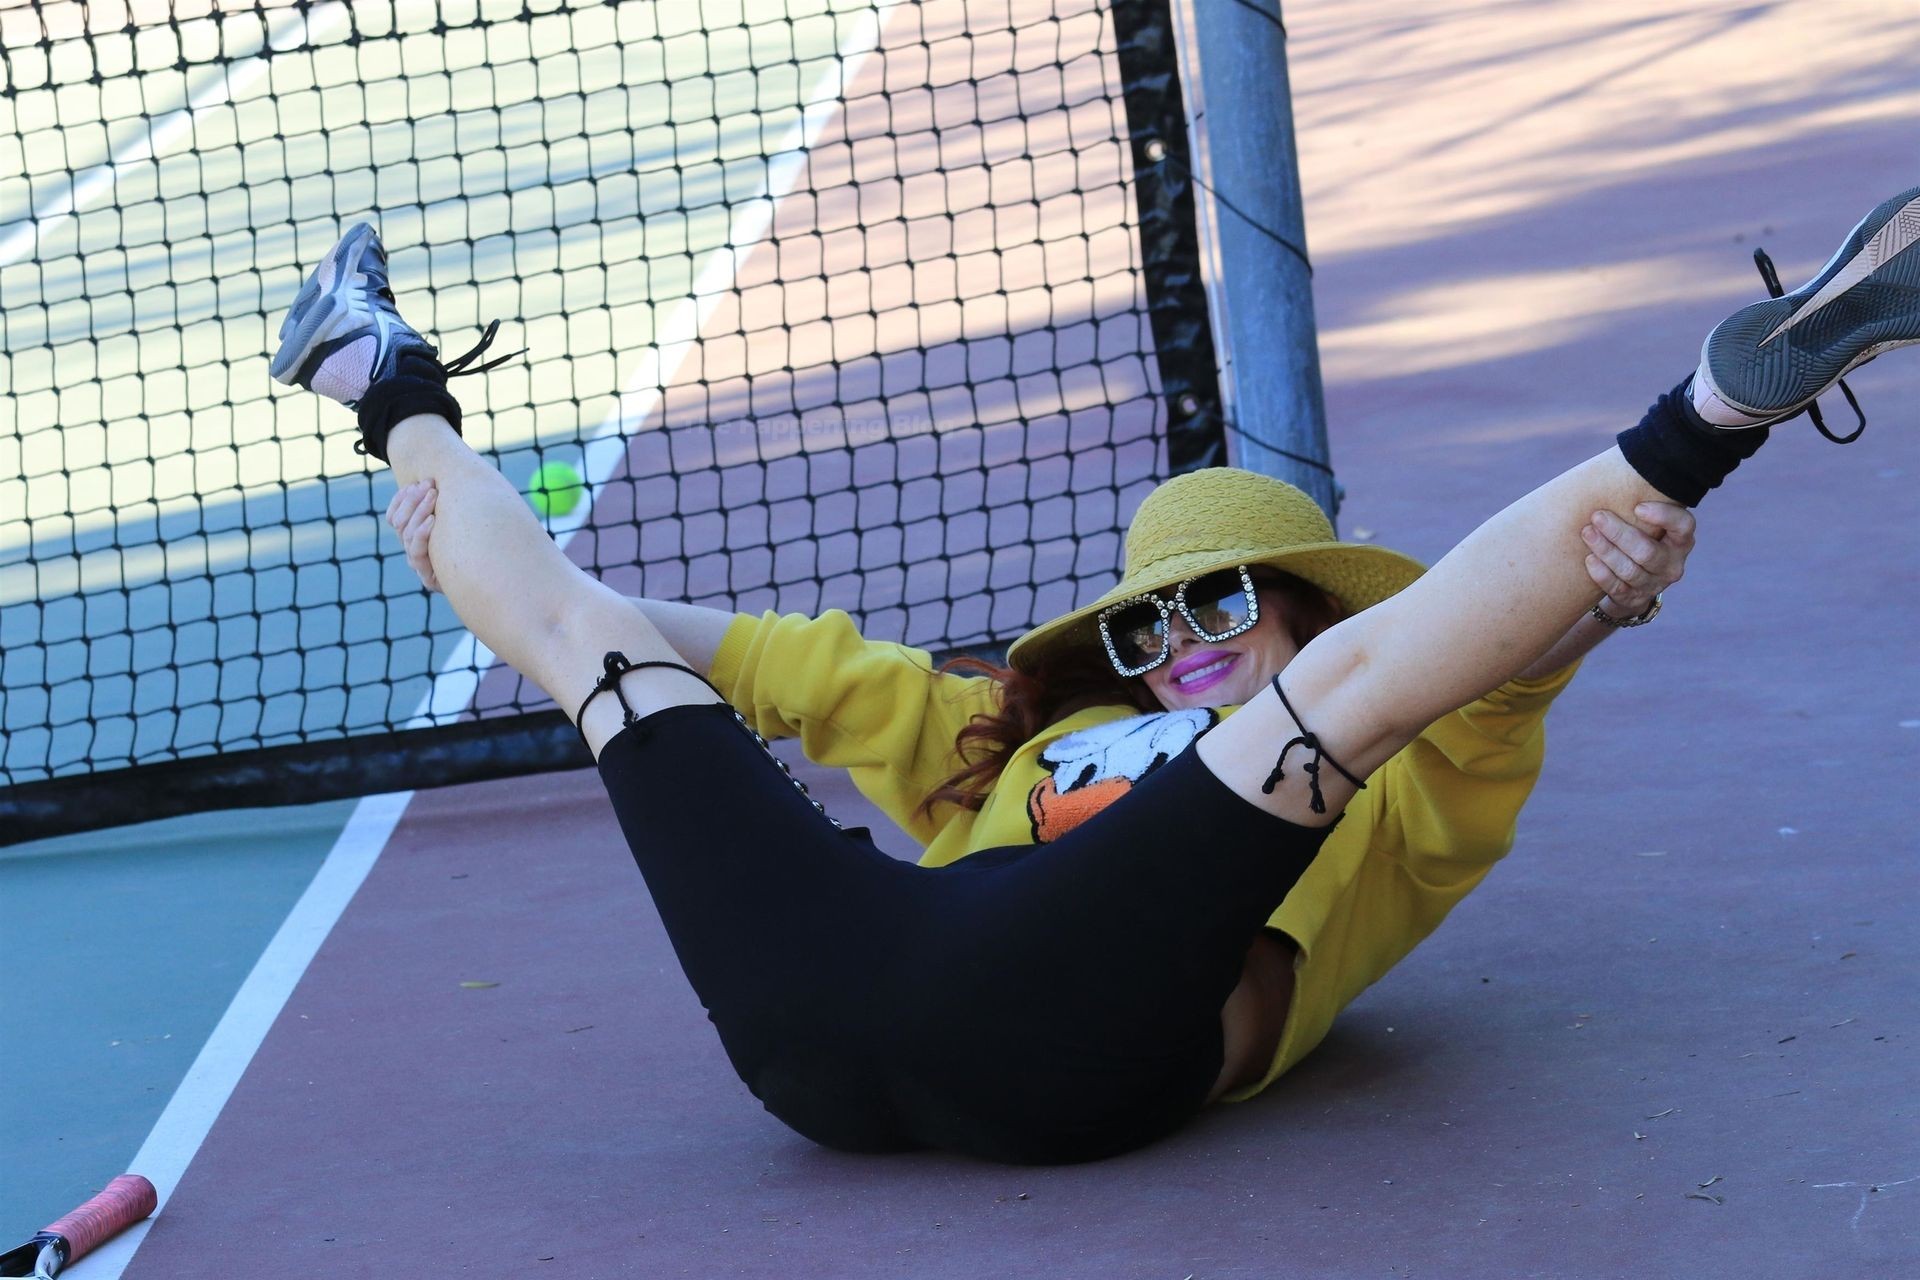 Phoebe Price Has a Nip Slip as She Gets Ready for Tennis (21 Nude & Sexy Photos)